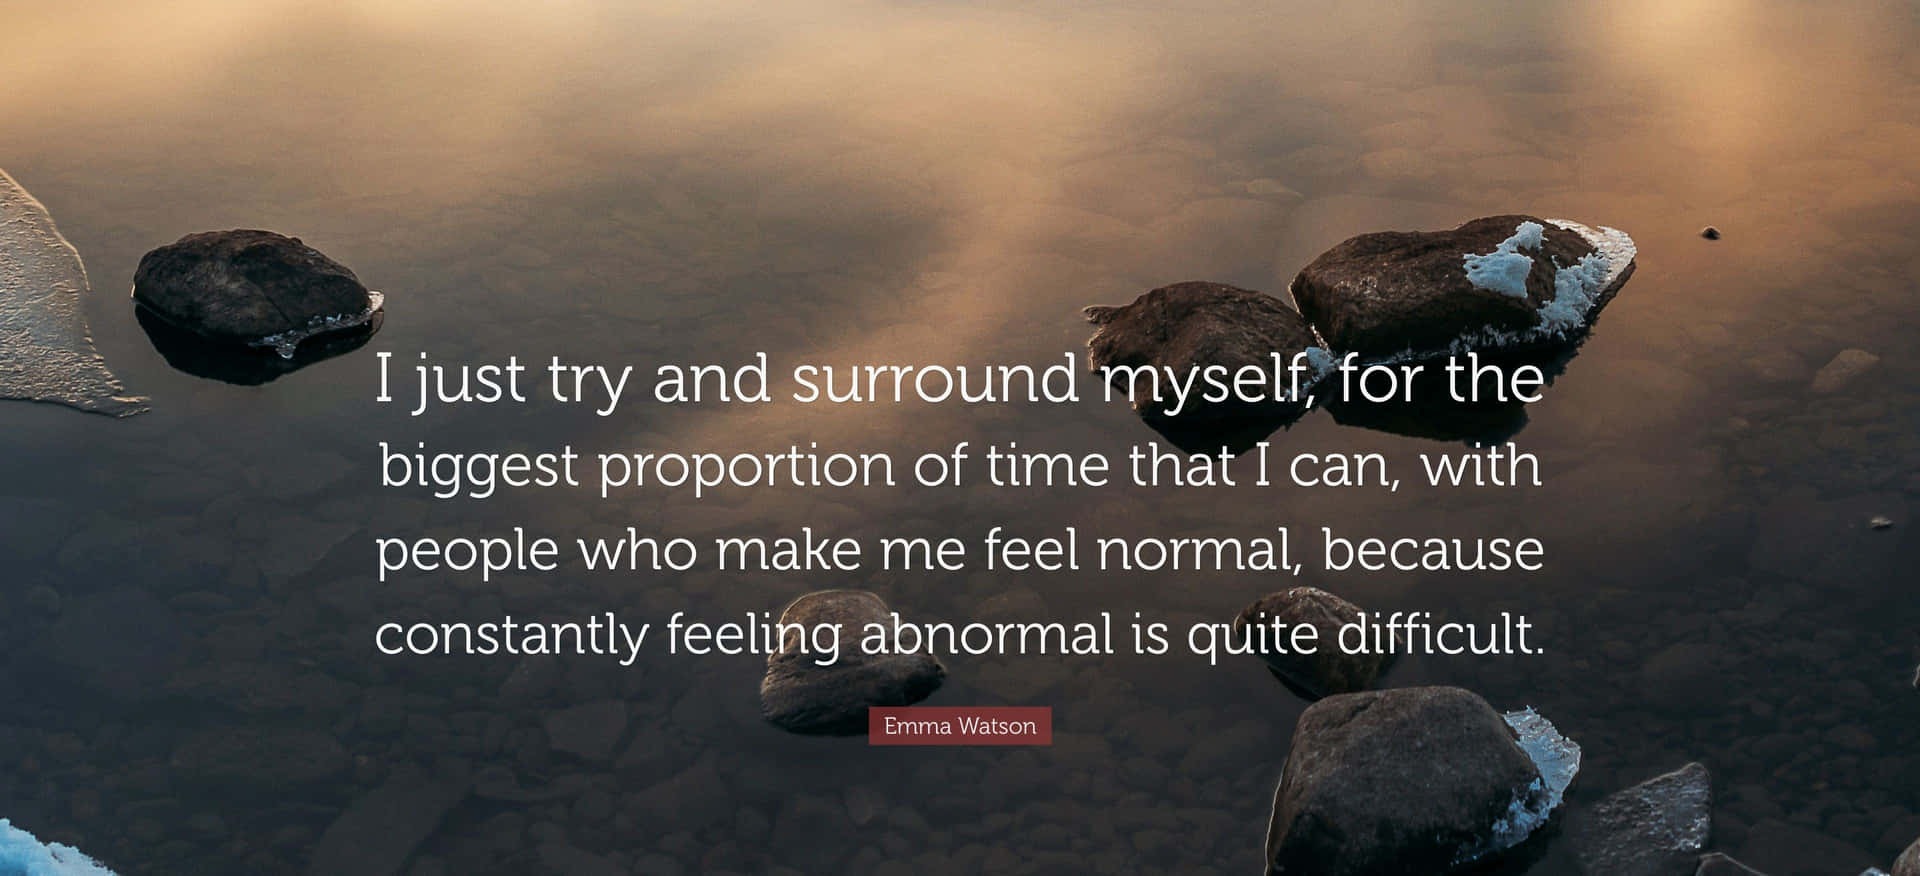 Abnormal Difficult Quote Wallpaper